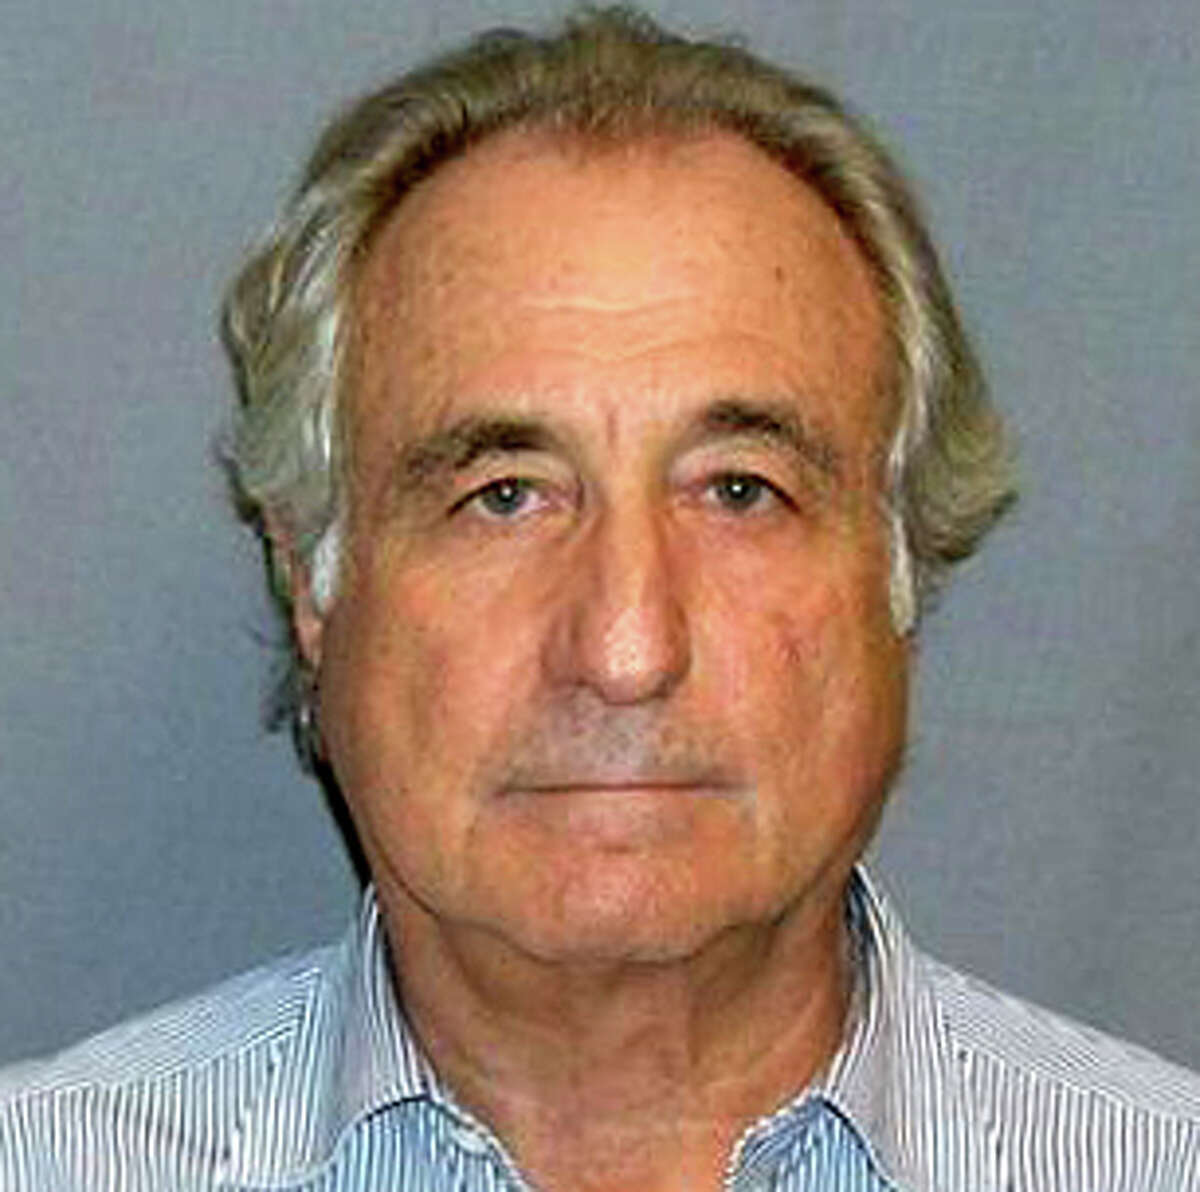 Fairfield was awarded $2.9 million Friday in a judgment against a Darien investment firm that placed town pension funds in the multi-billion-dollar Ponzi scheme orchestrated by convicted Wall Street financier Bernard Madoff.